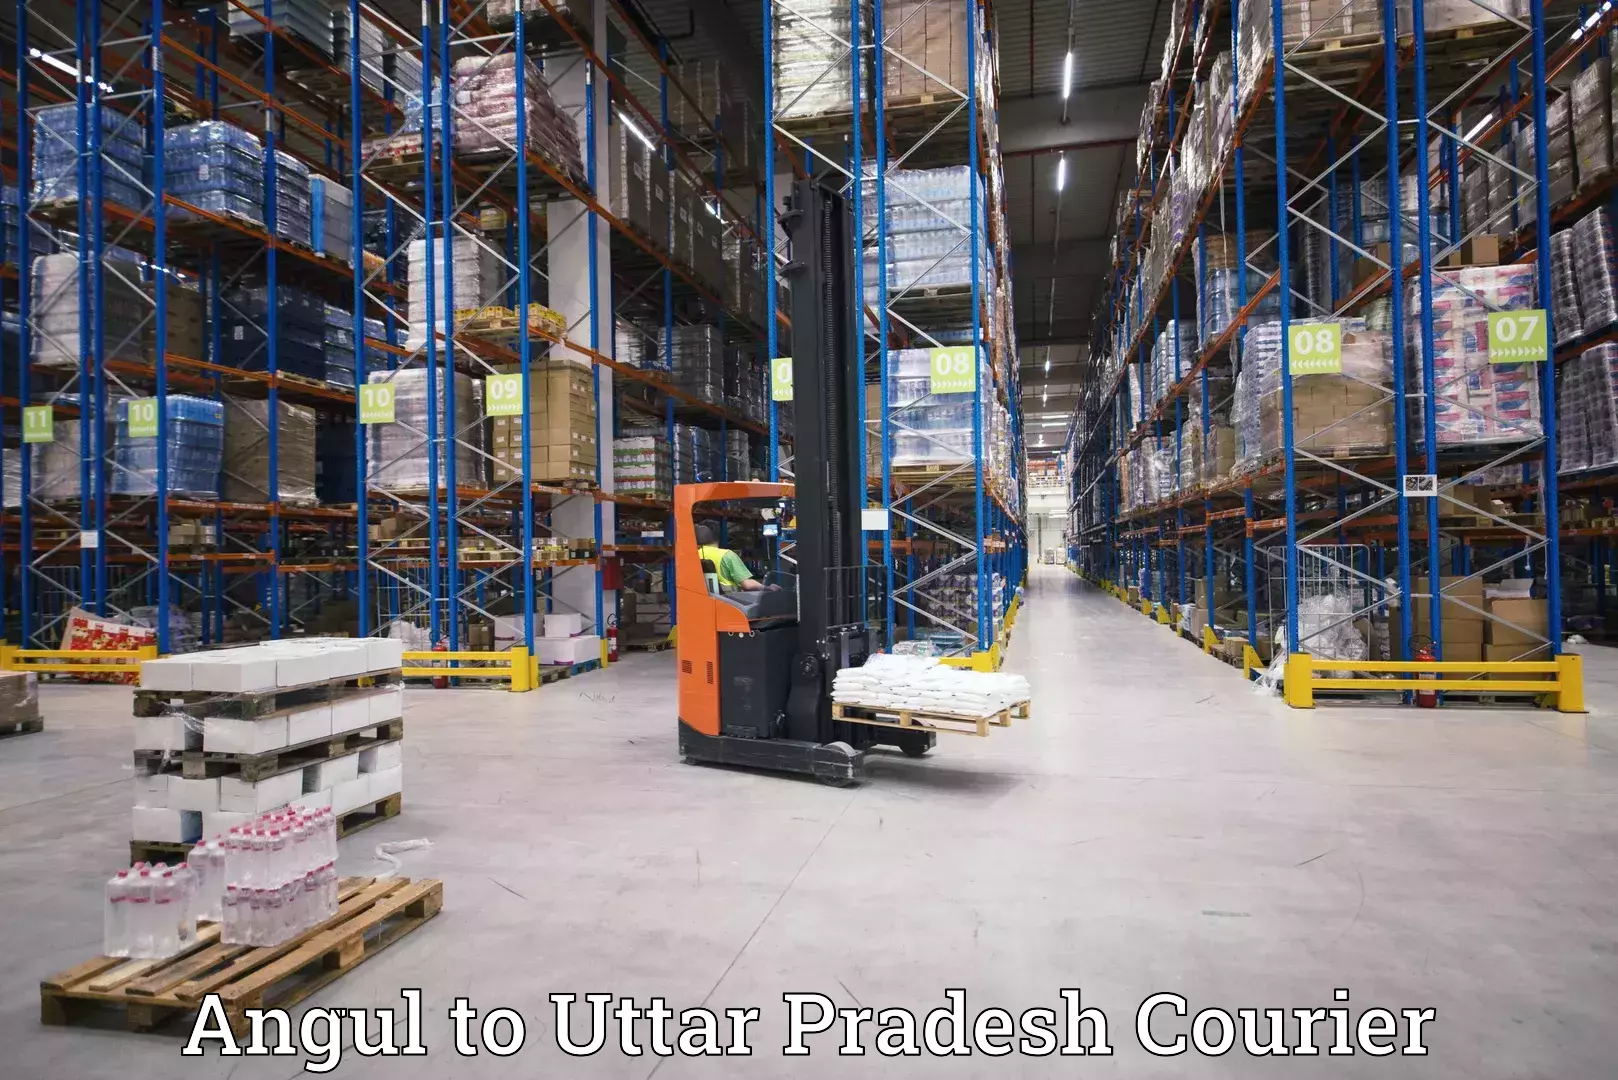 Express courier capabilities in Angul to Modinagar